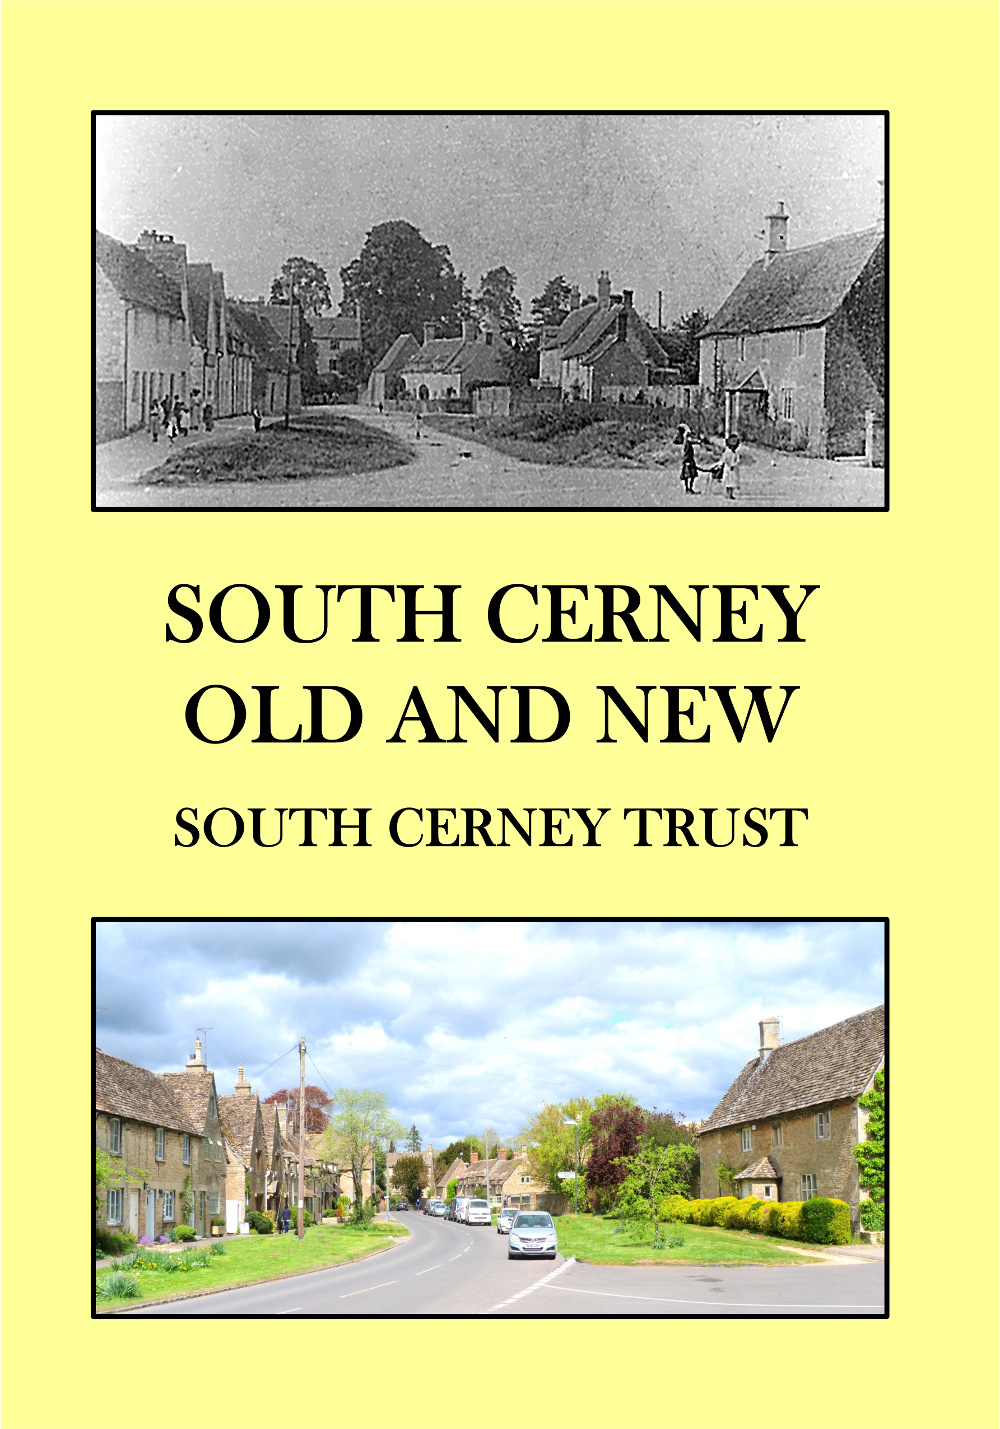 South Cerney Old and New